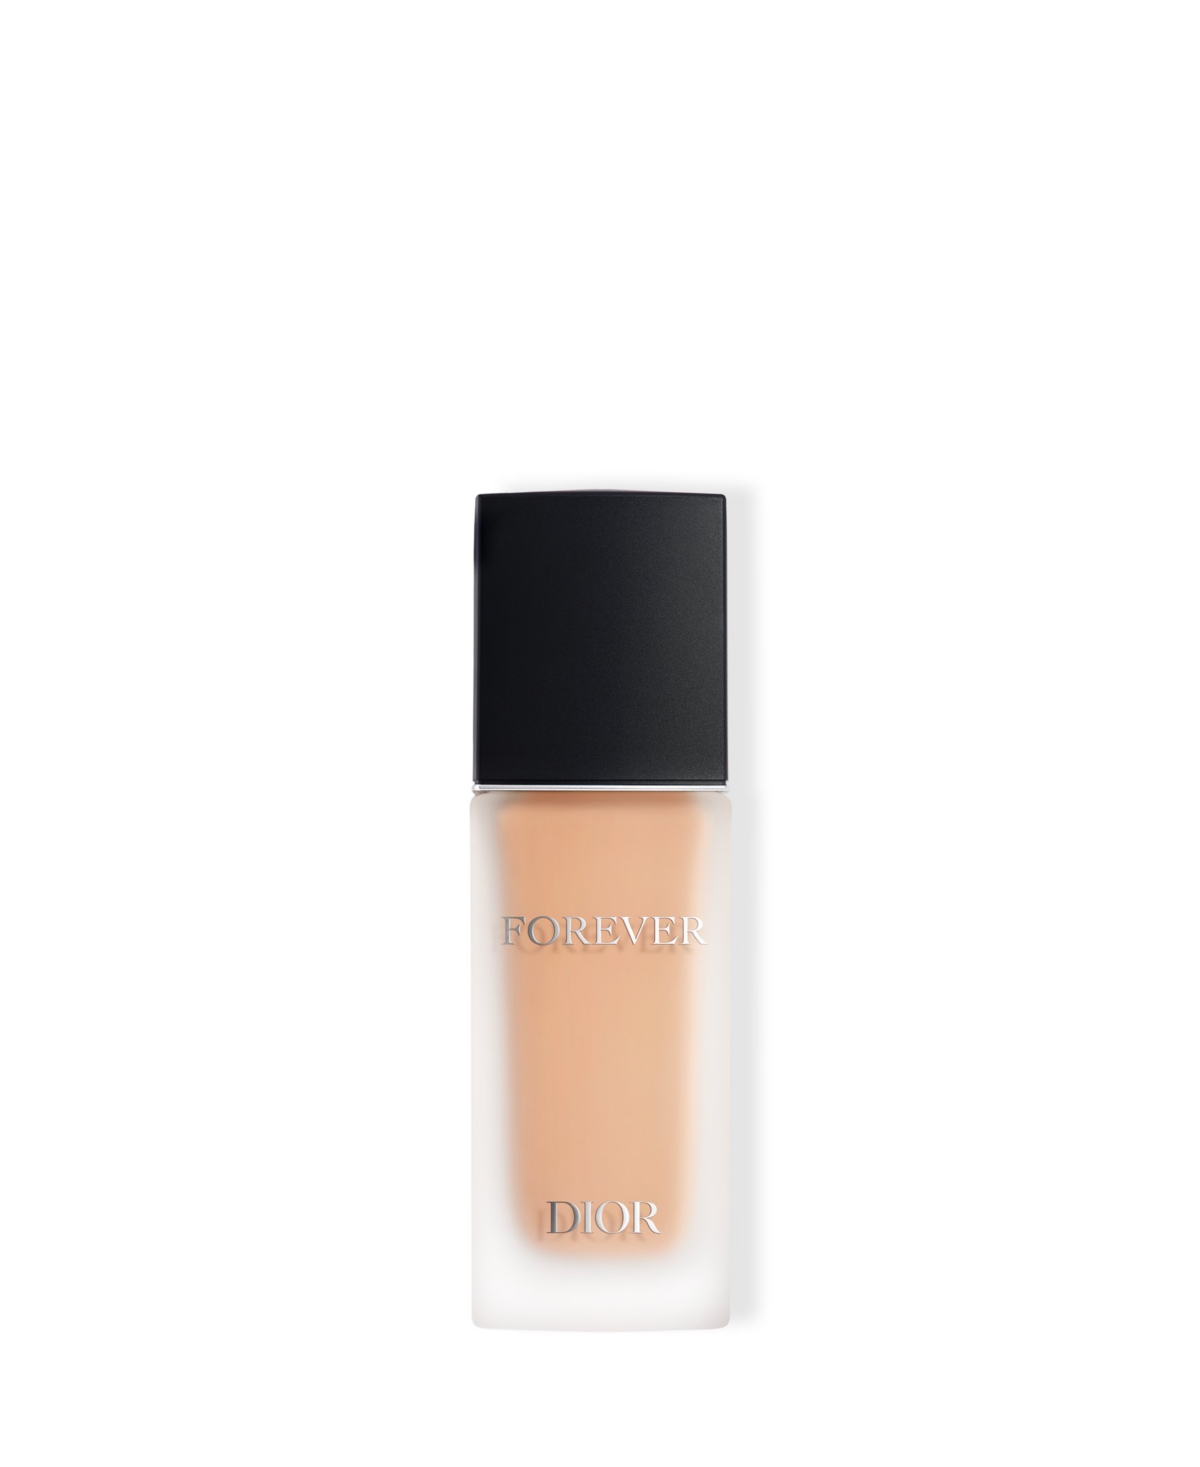 Dior Forever Matte Skincare Foundation Spf 15 In Warm Peach (light To Medium Skin With Wa